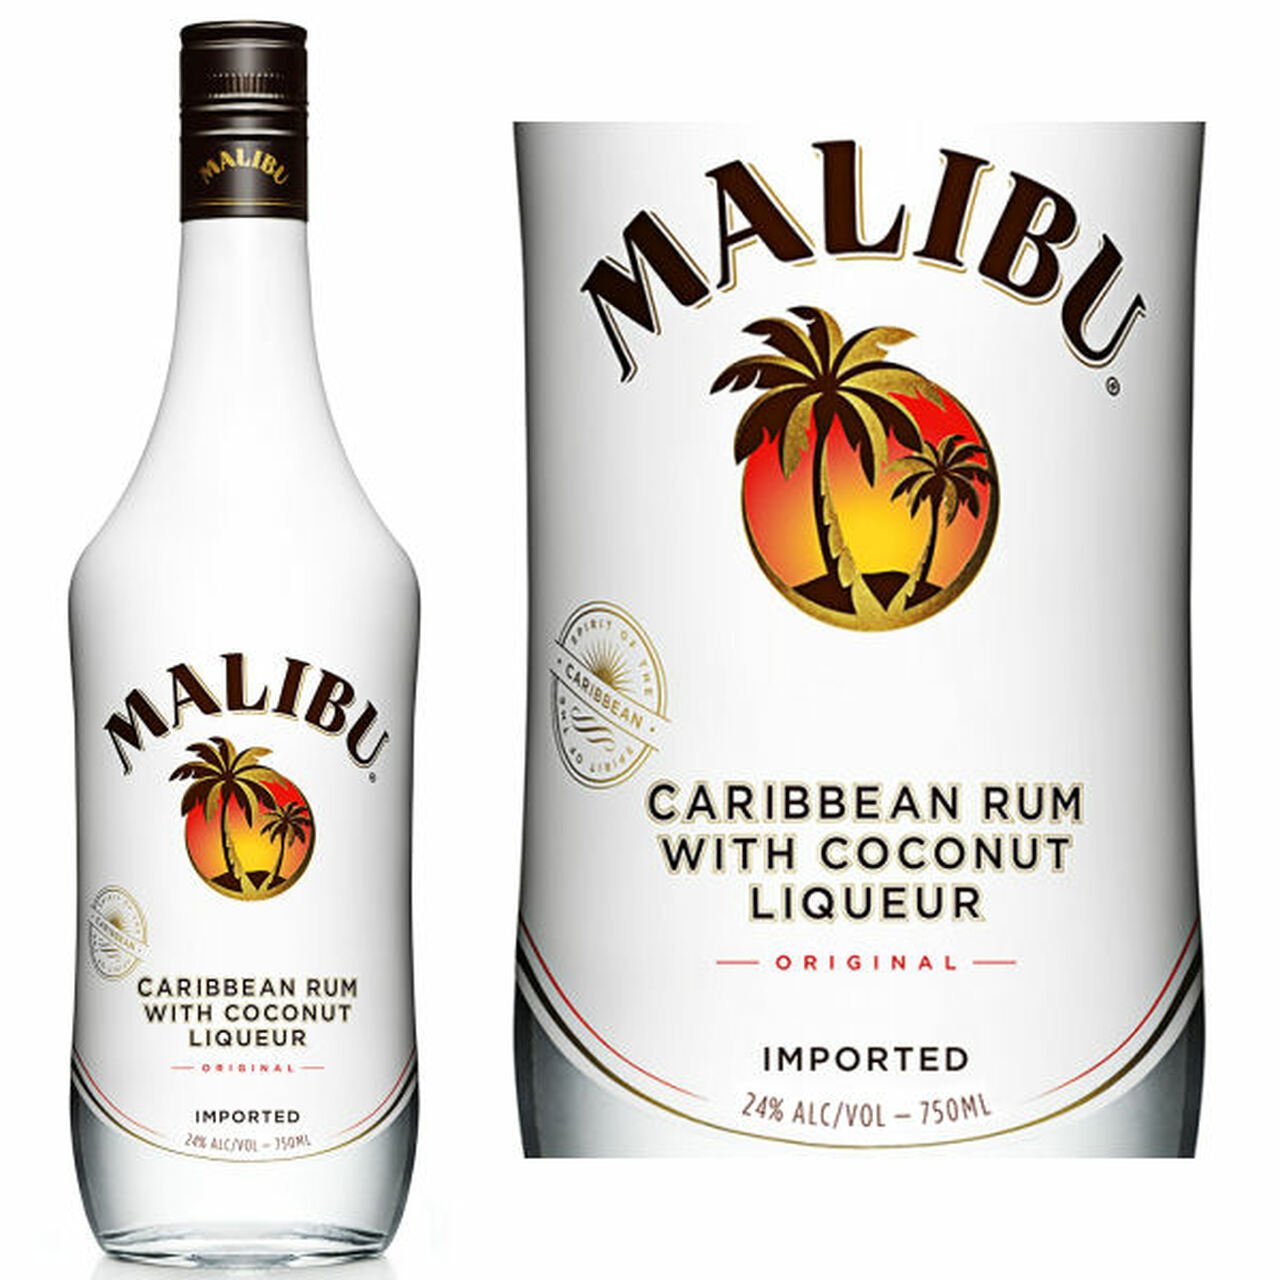 Drinks Made With Malibu Coconut Rum / Whether you